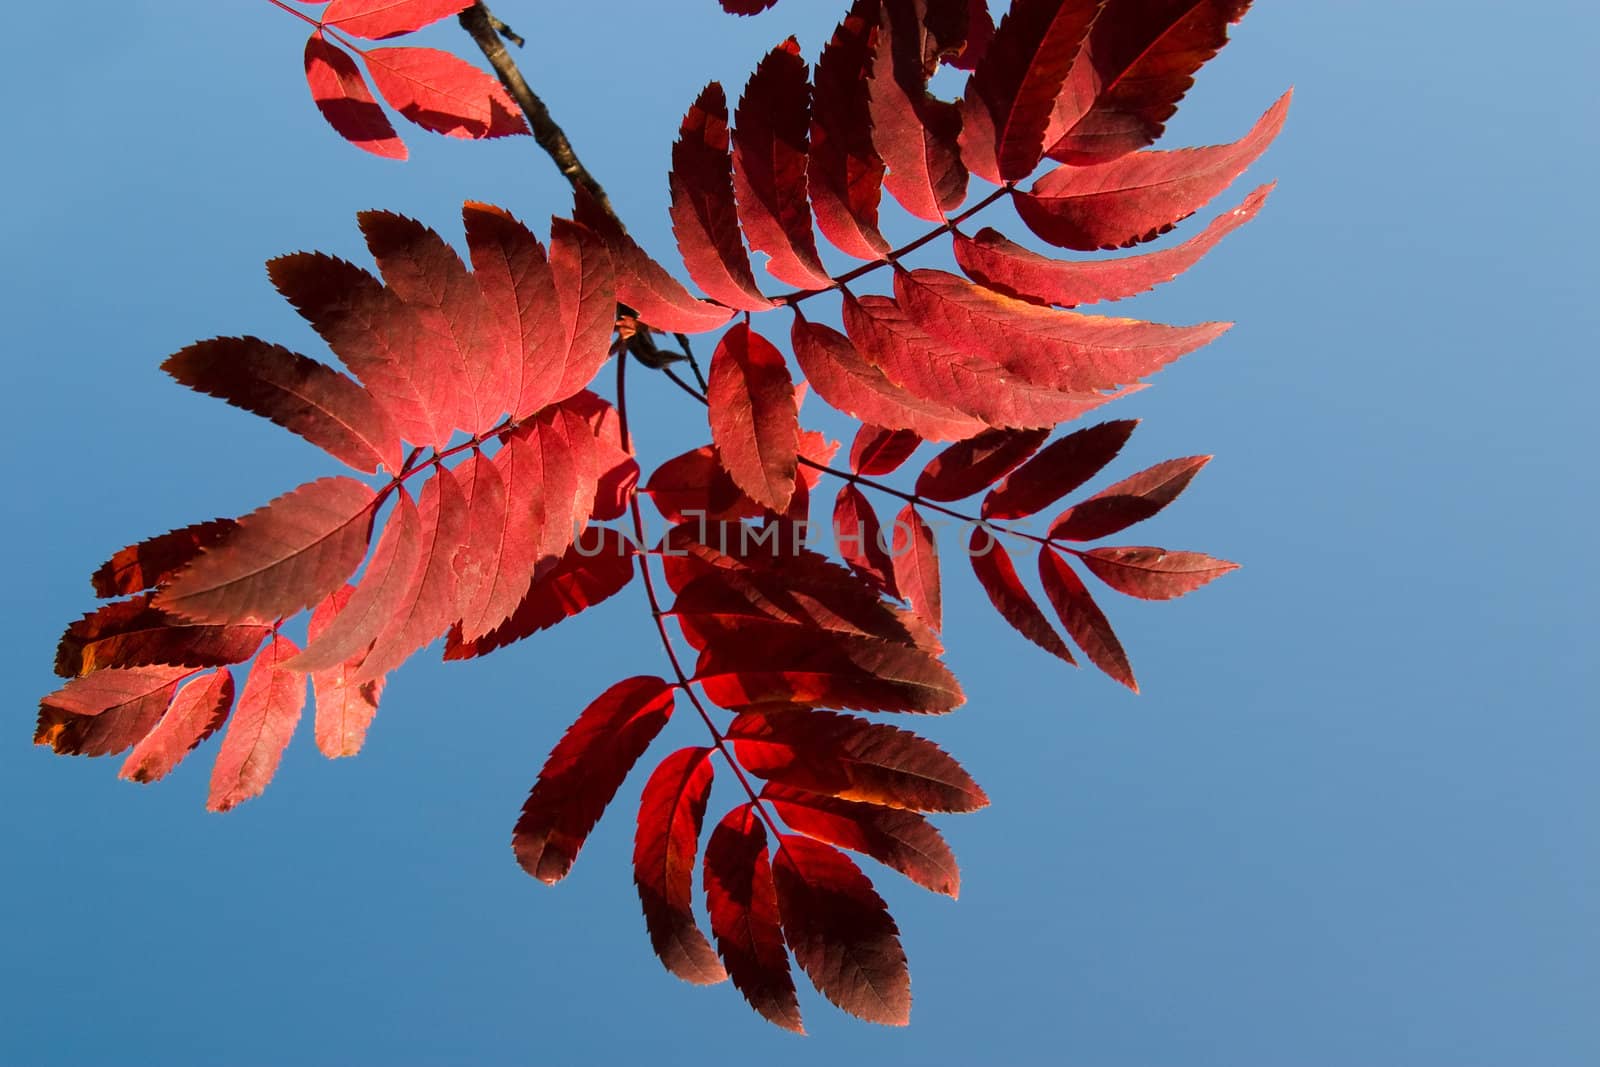 Red leaves by Ohotnik